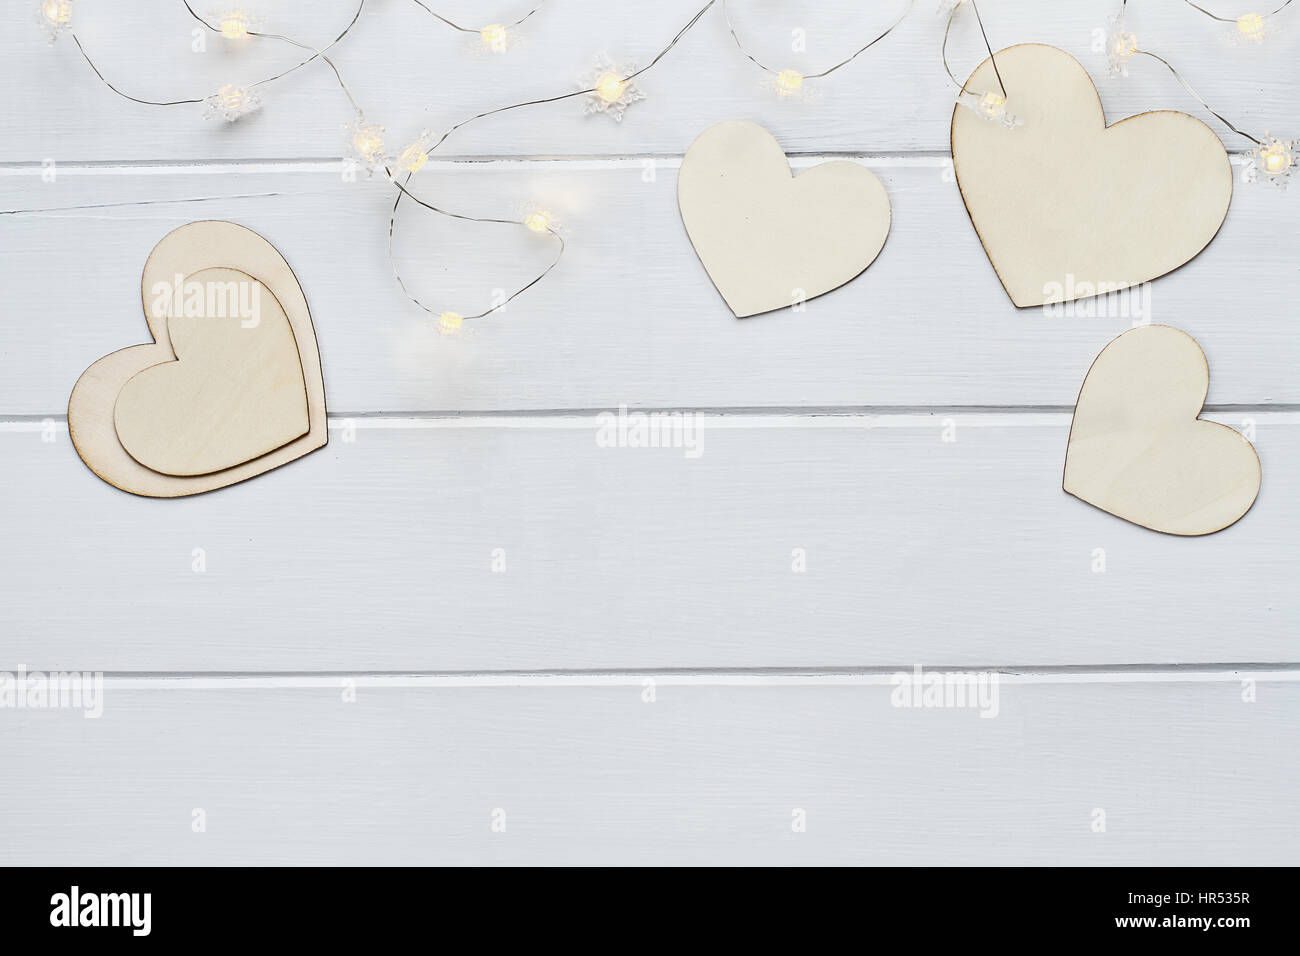 Overhead view of wooden love Valentine's hearts with lite fairy lights over a wooden background with copy space available. Stock Photo